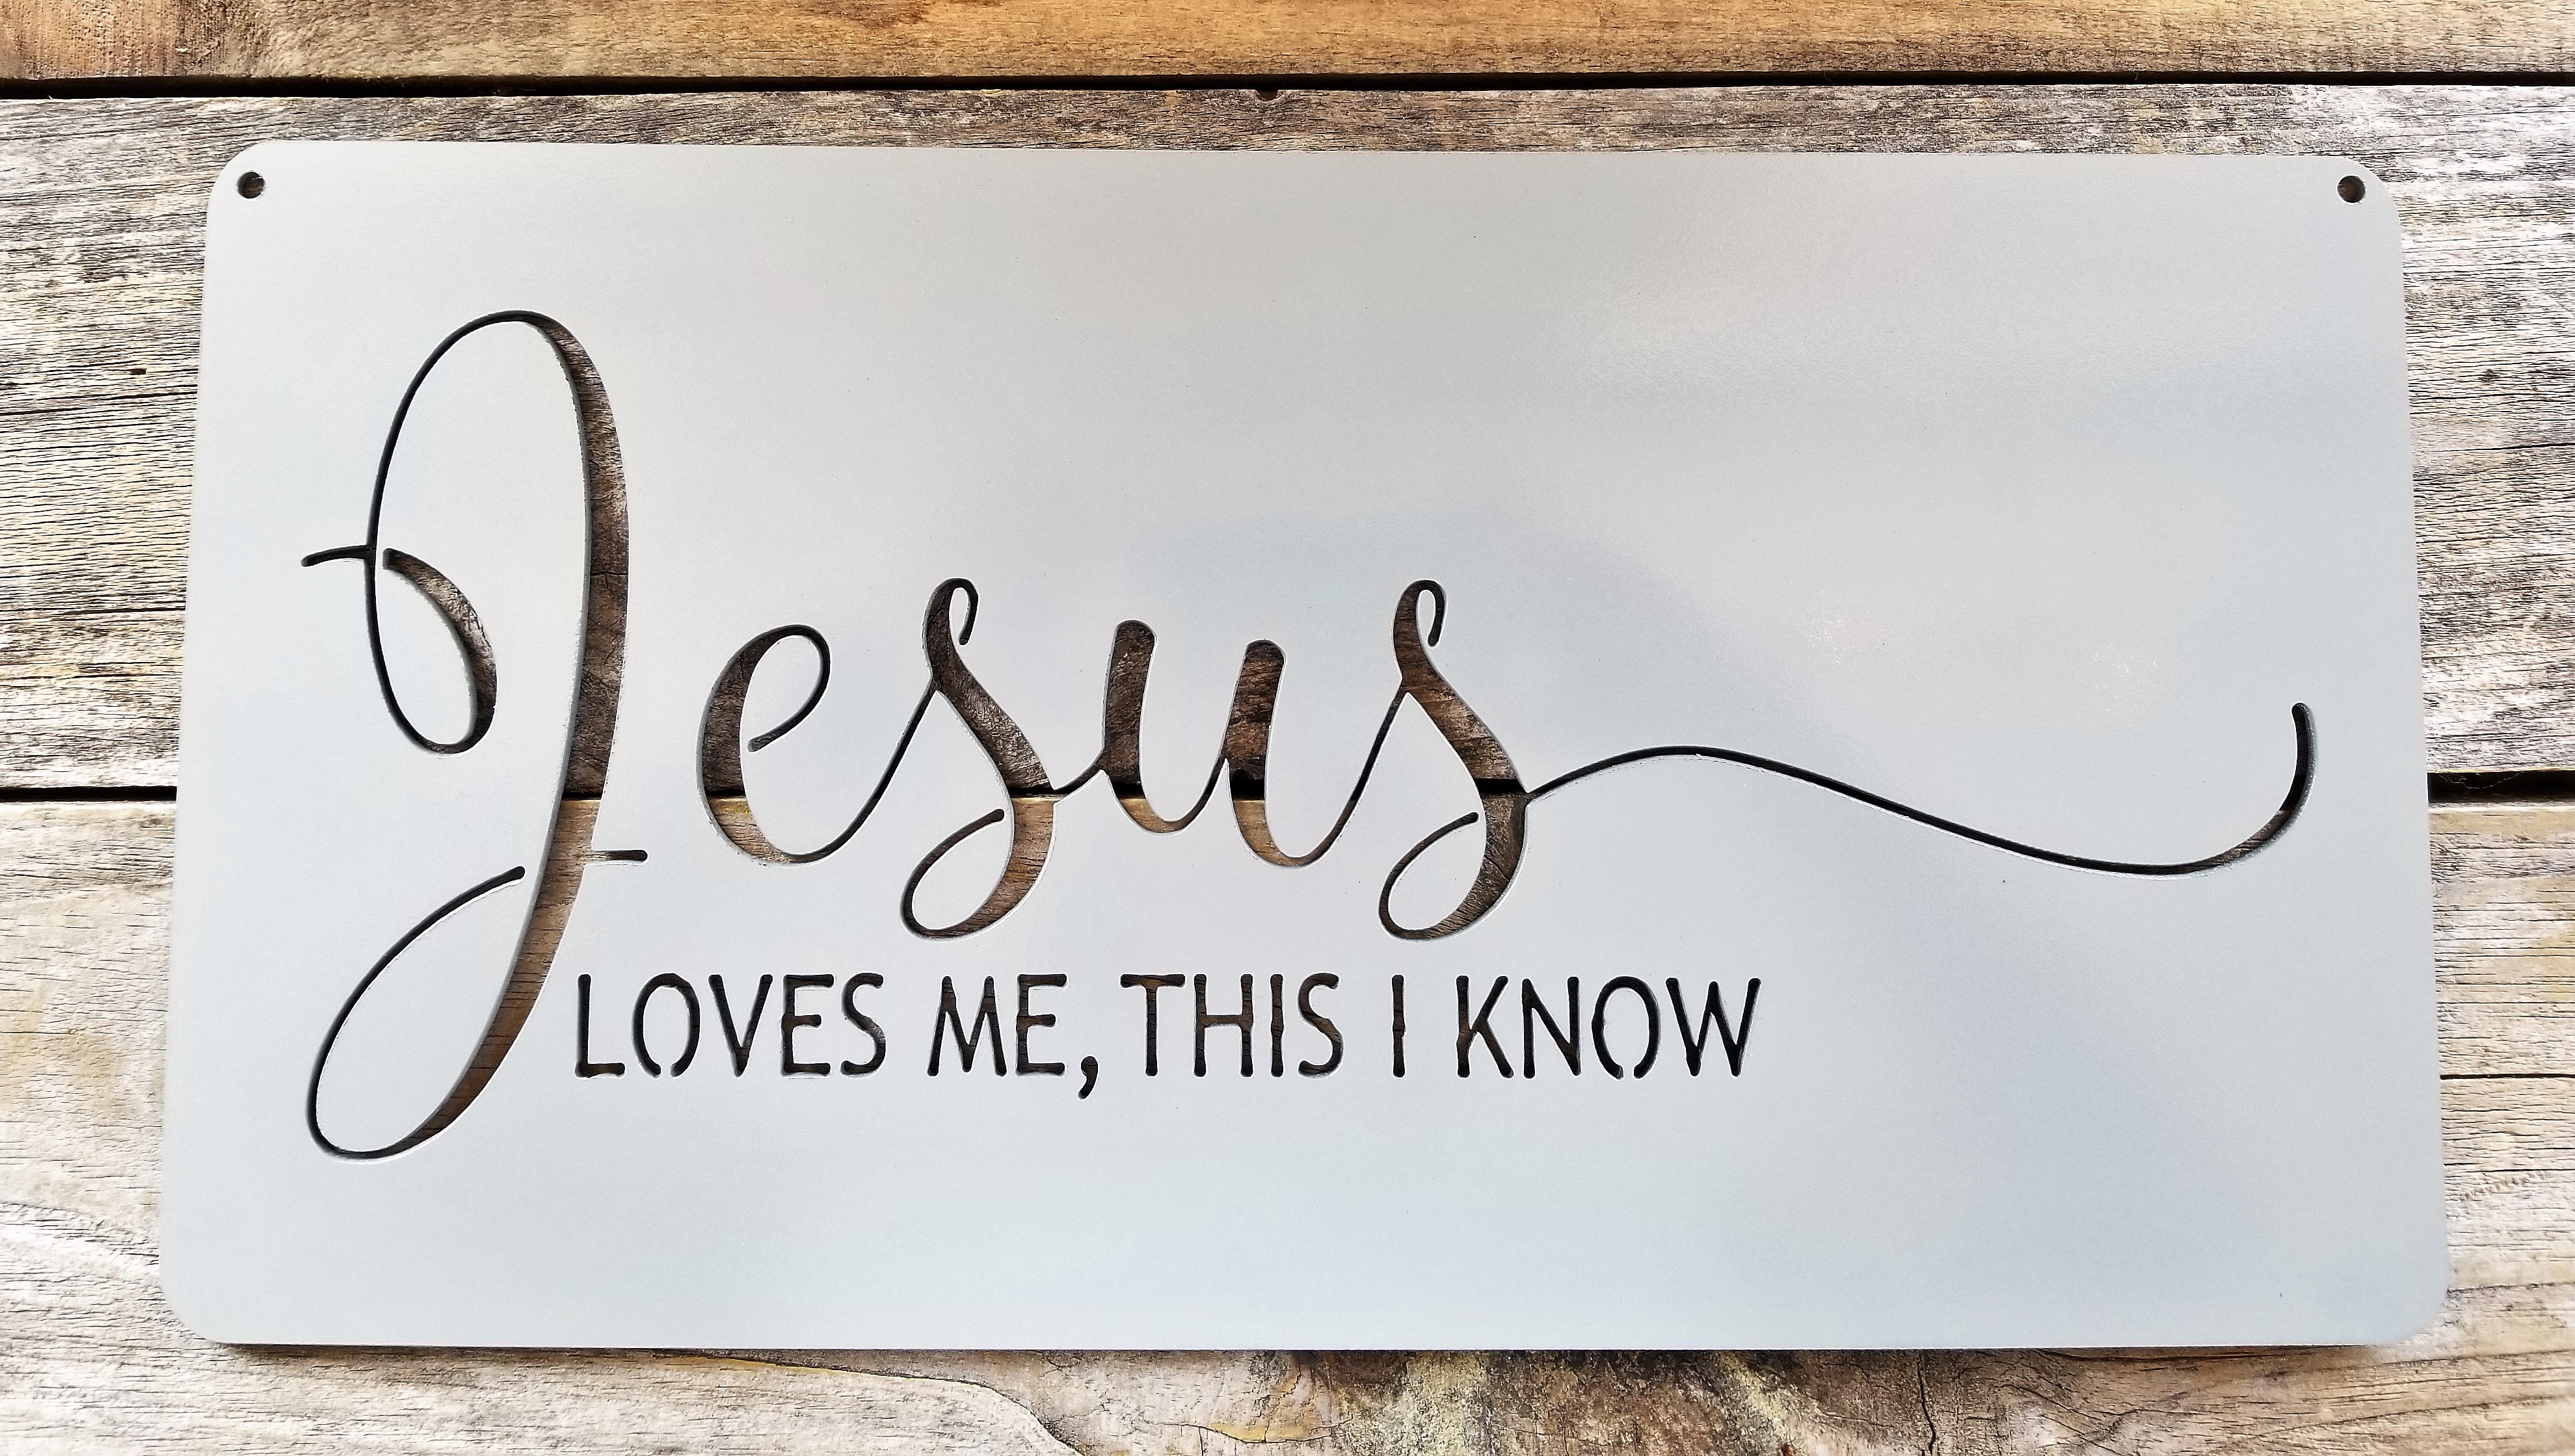 Jesus-Loves-Me-this-I-Know